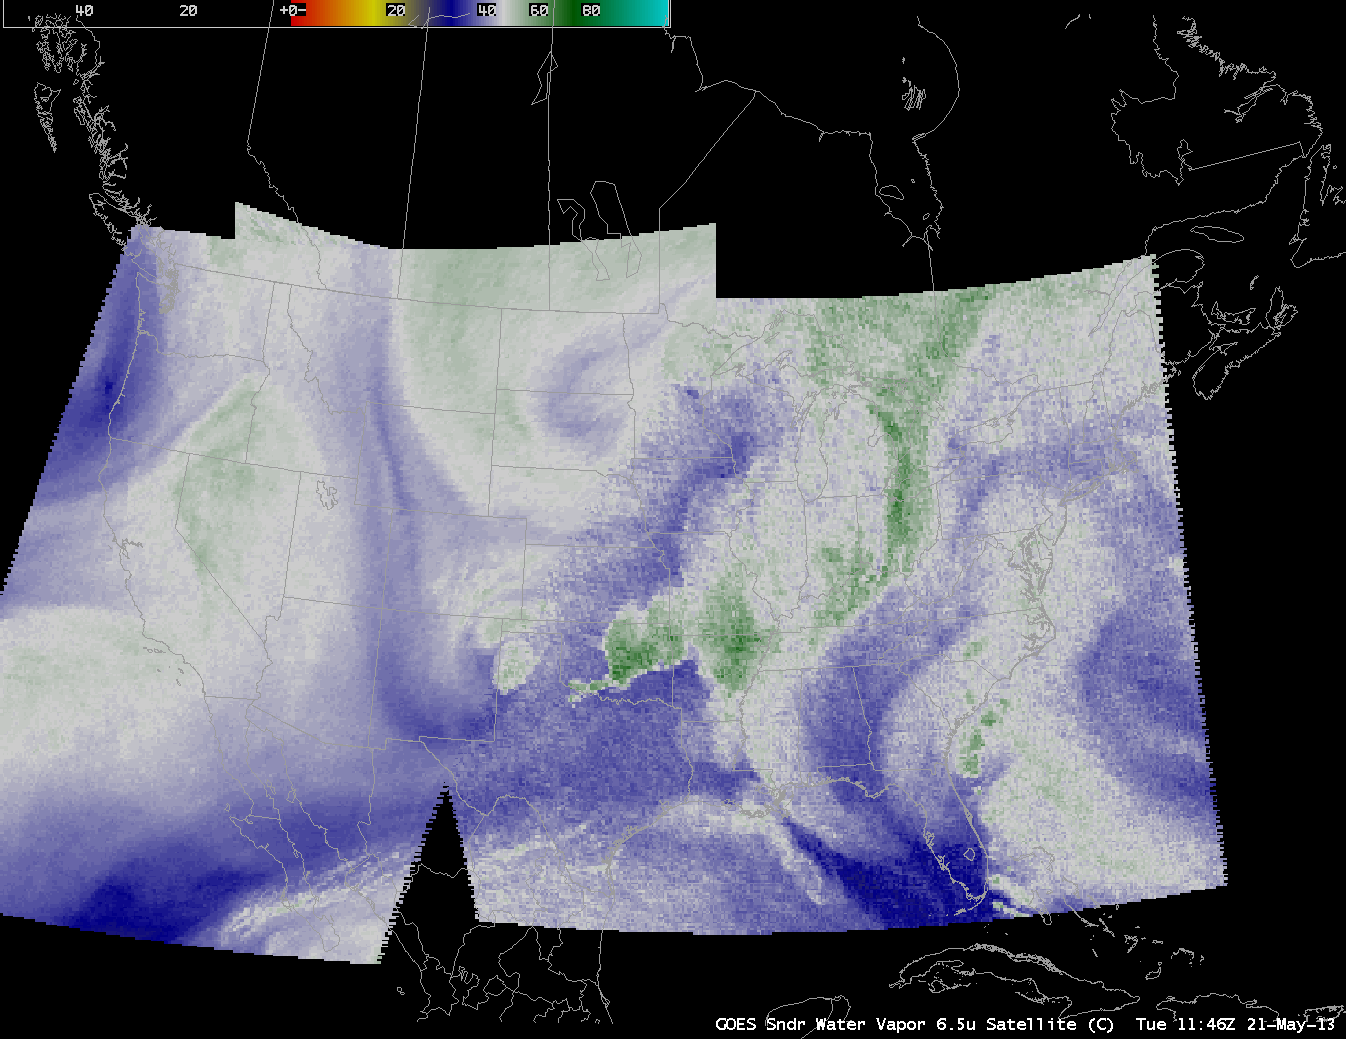 GOES sounder water vapor channel (6.5 Âµm) imagery from GOES-13 and GOES-14